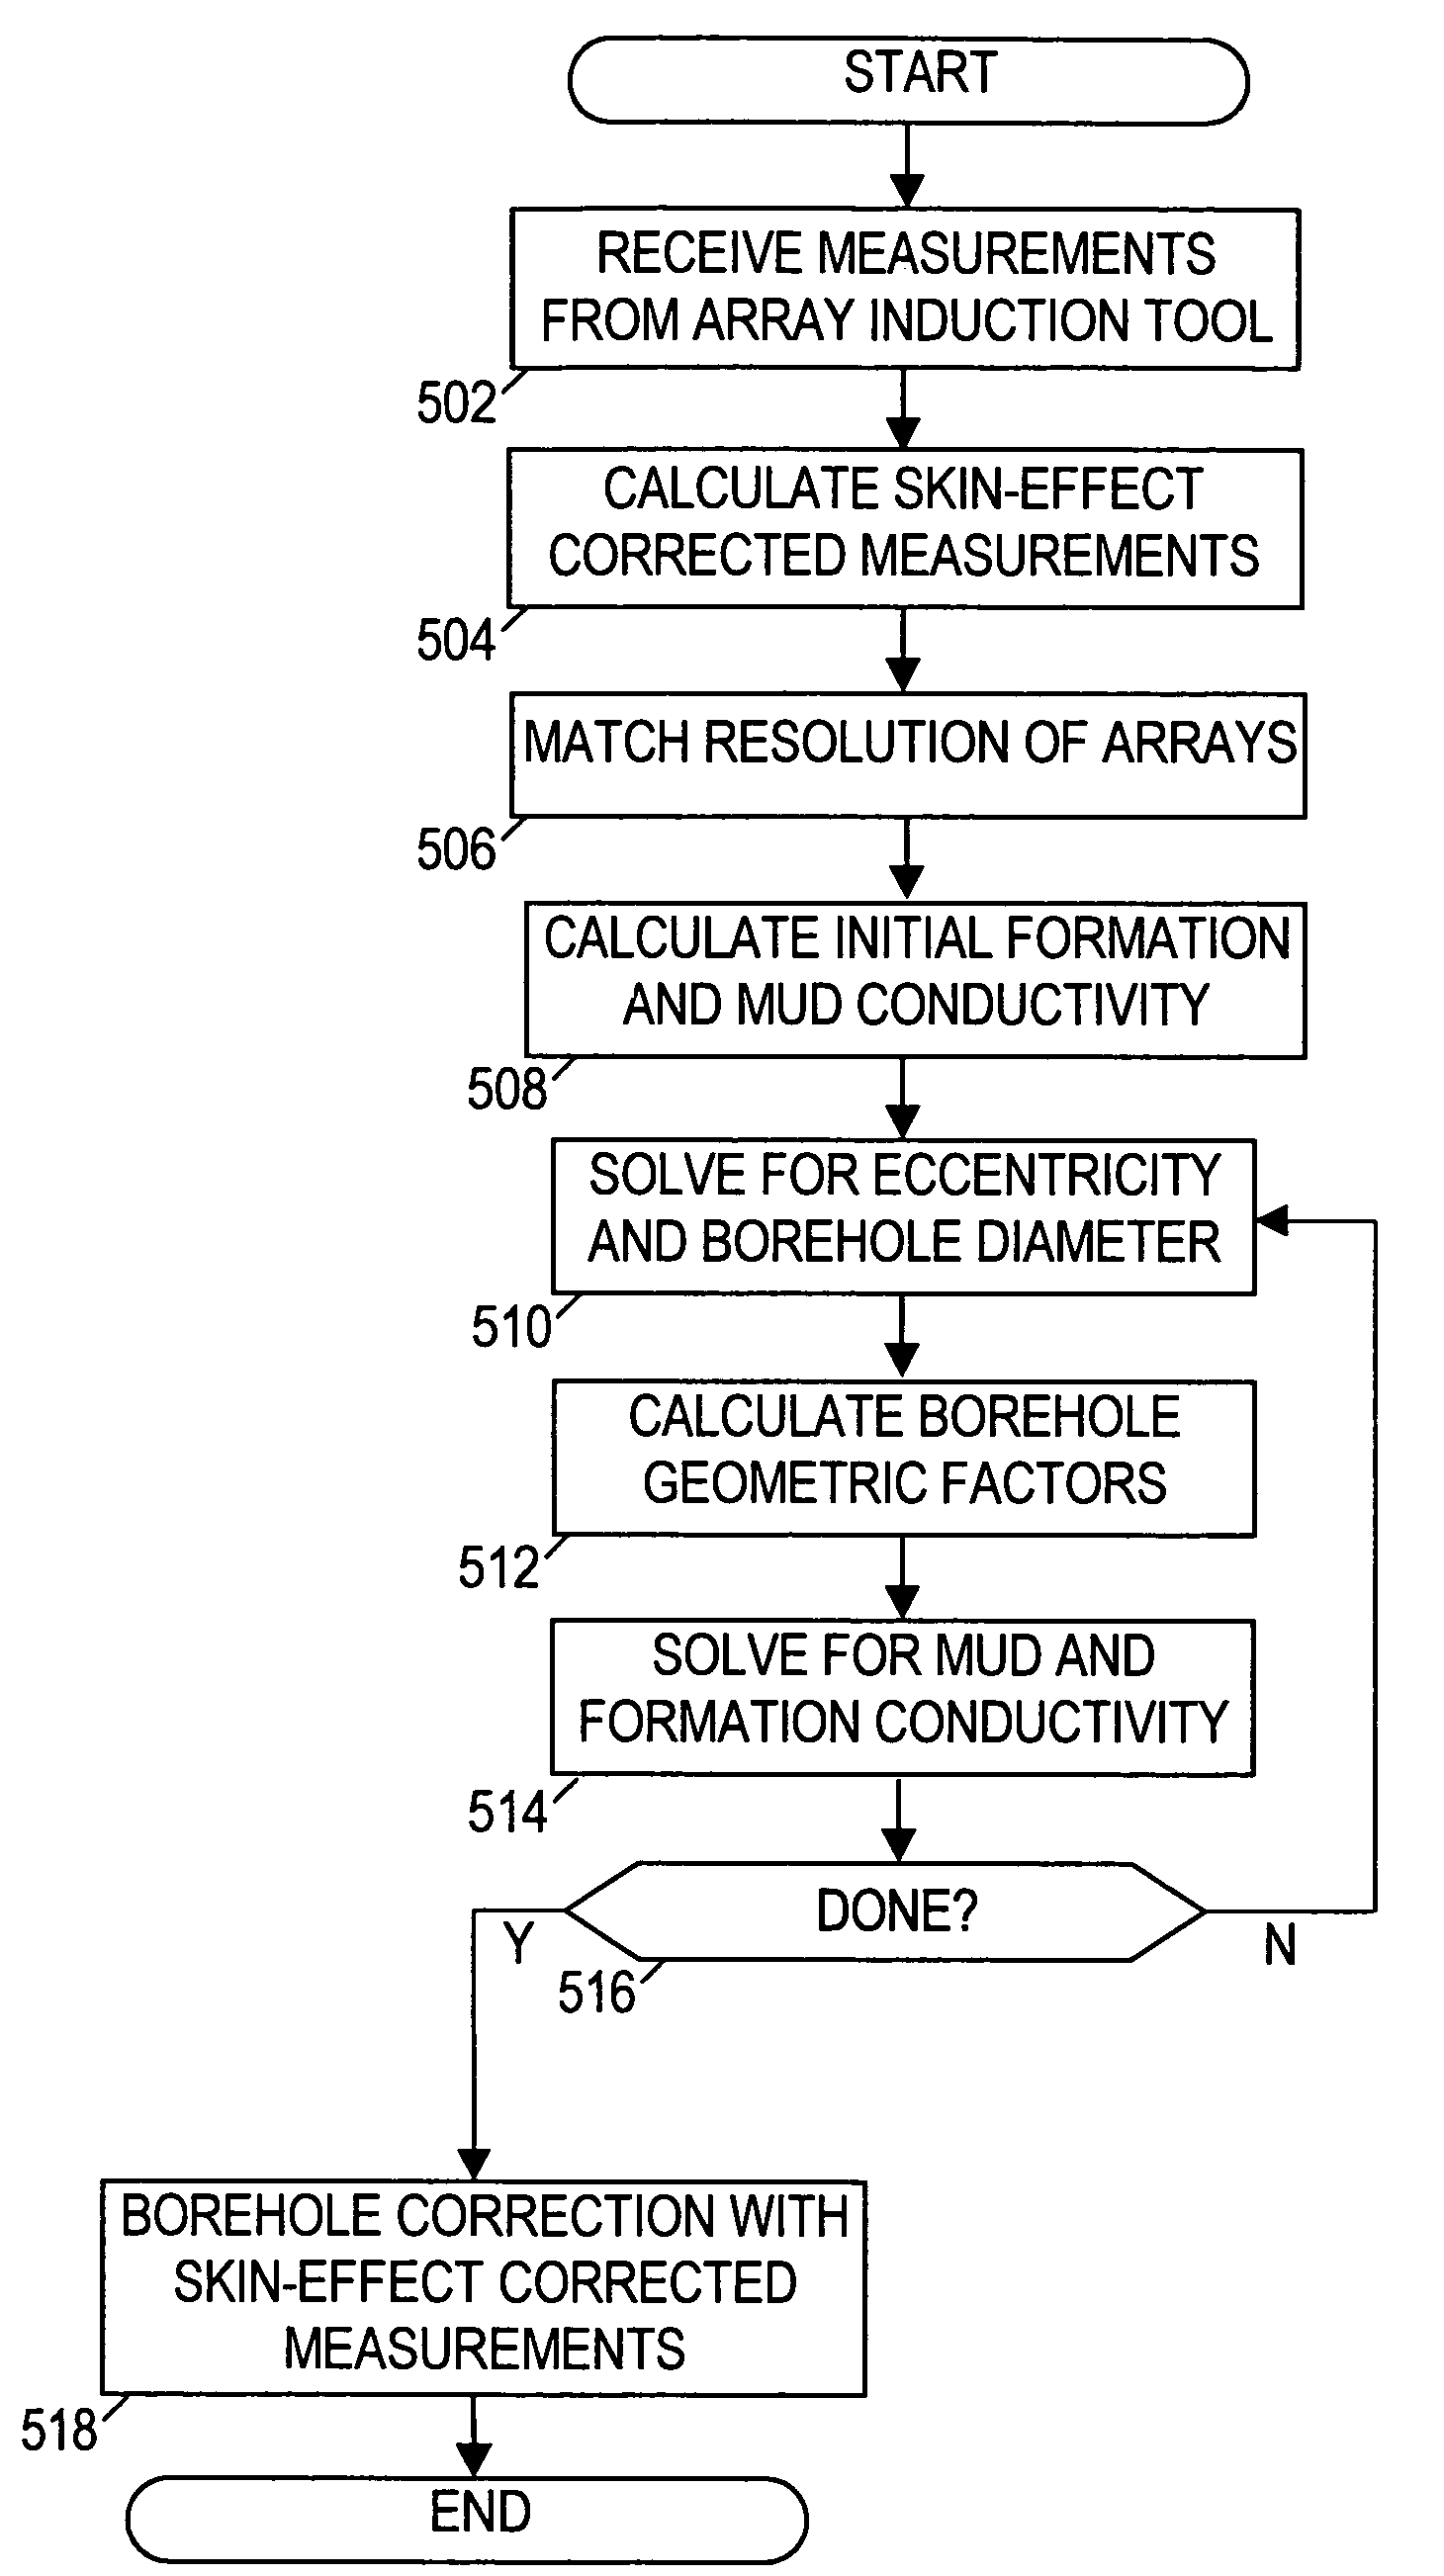 System and method for correcting induction logging device measurements by alternately estimating geometry and conductivity parameters